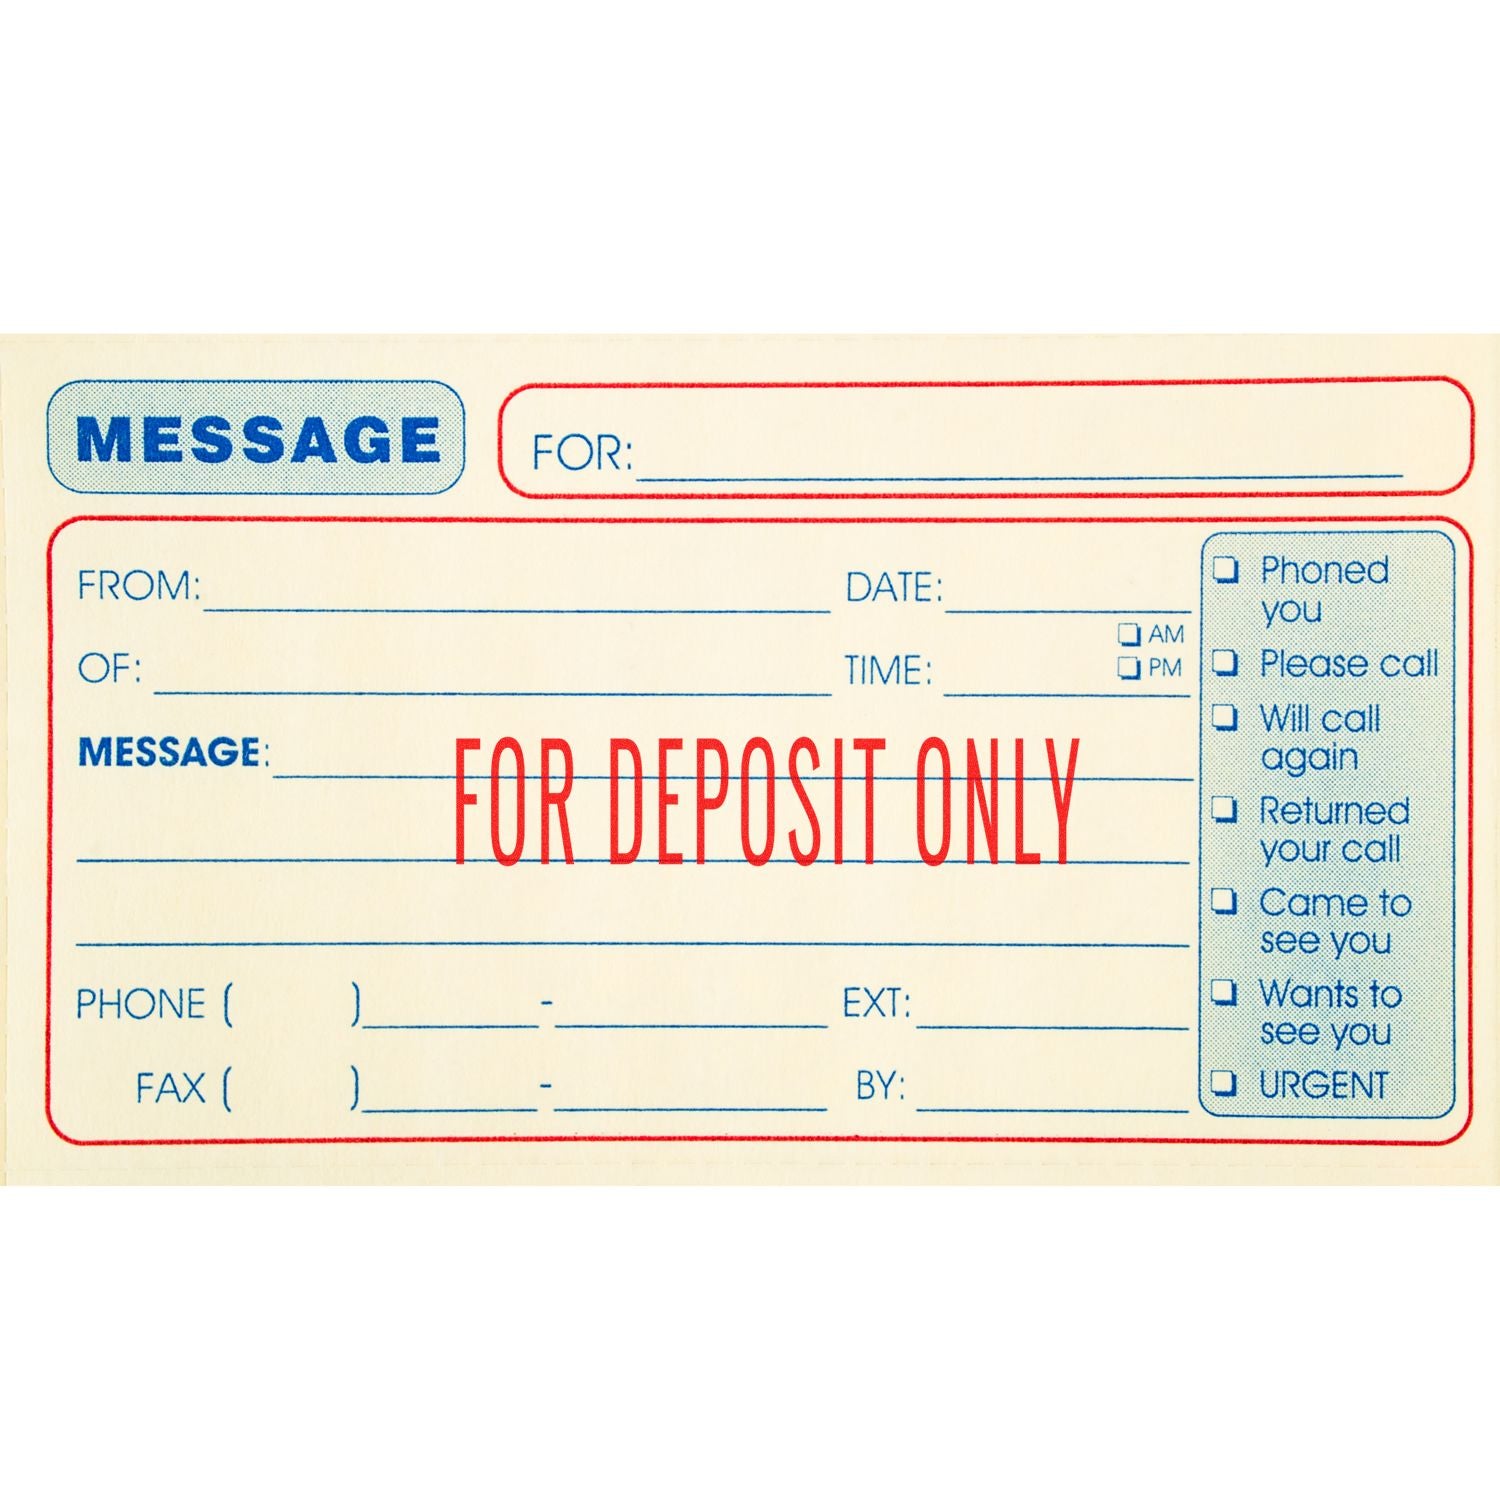 A stock office rubber stamp with a stamped image showing how the text "FOR DEPOSIT ONLY" in a large narrow font is displayed after stamping.